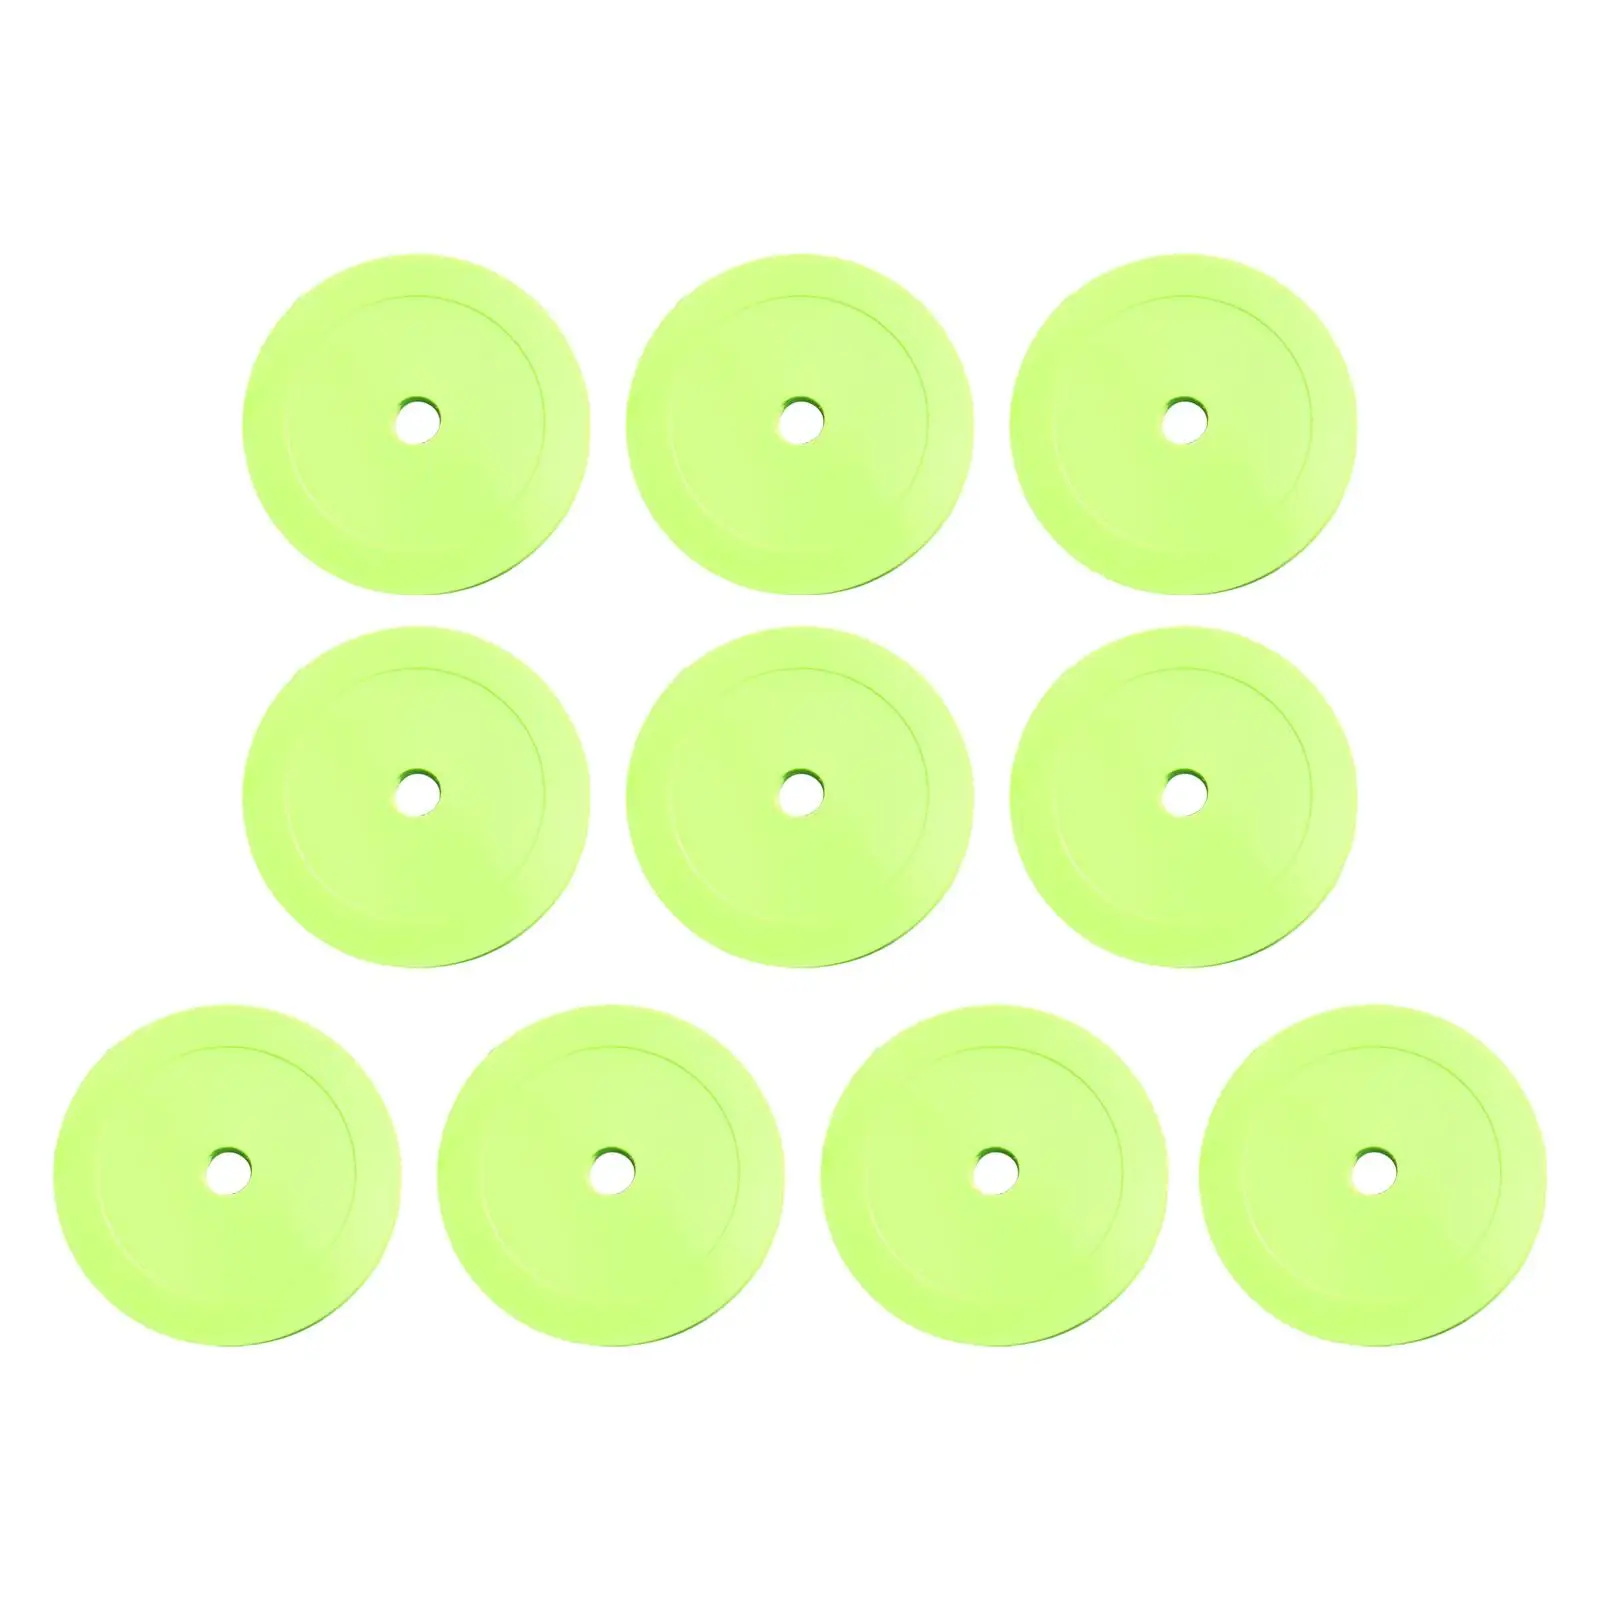 10x Round Flat Cones Flexible Non Slip Floor Discs Training Spot Markers for Sport Teams Boxing Soccer Sports Training